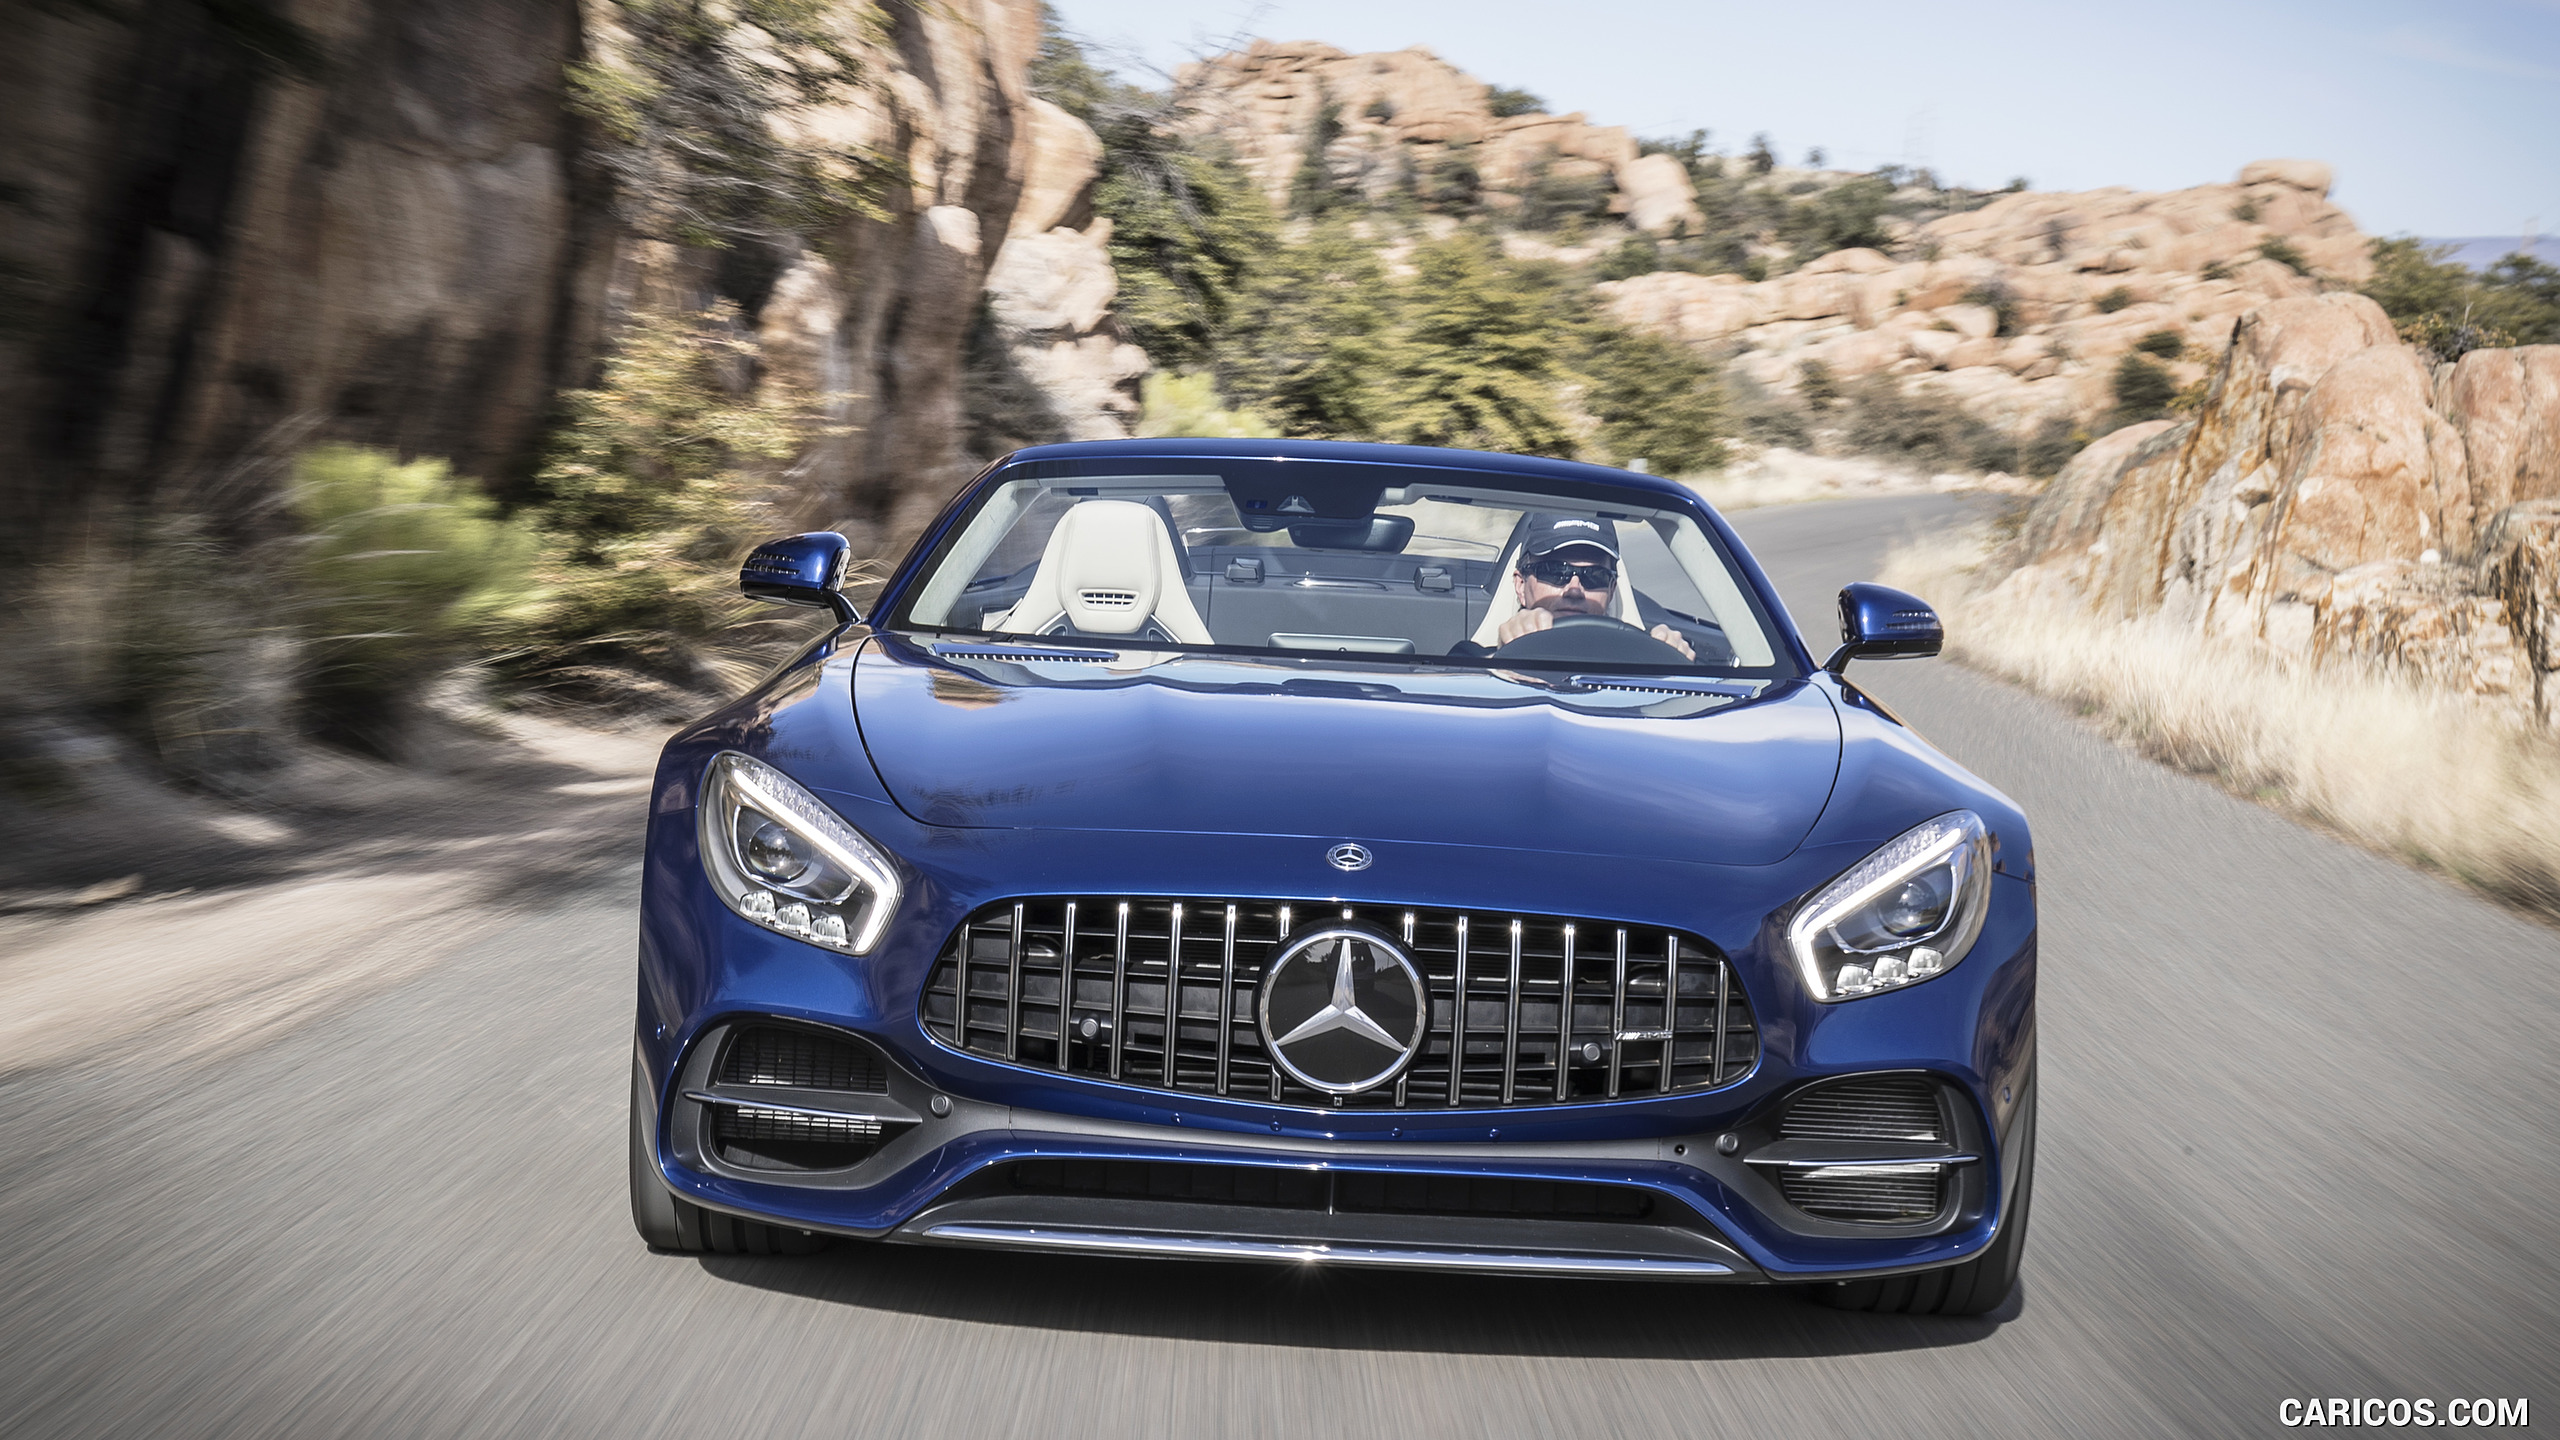 2018 Mercedes-AMG GT Roadster - Front, #136 of 350